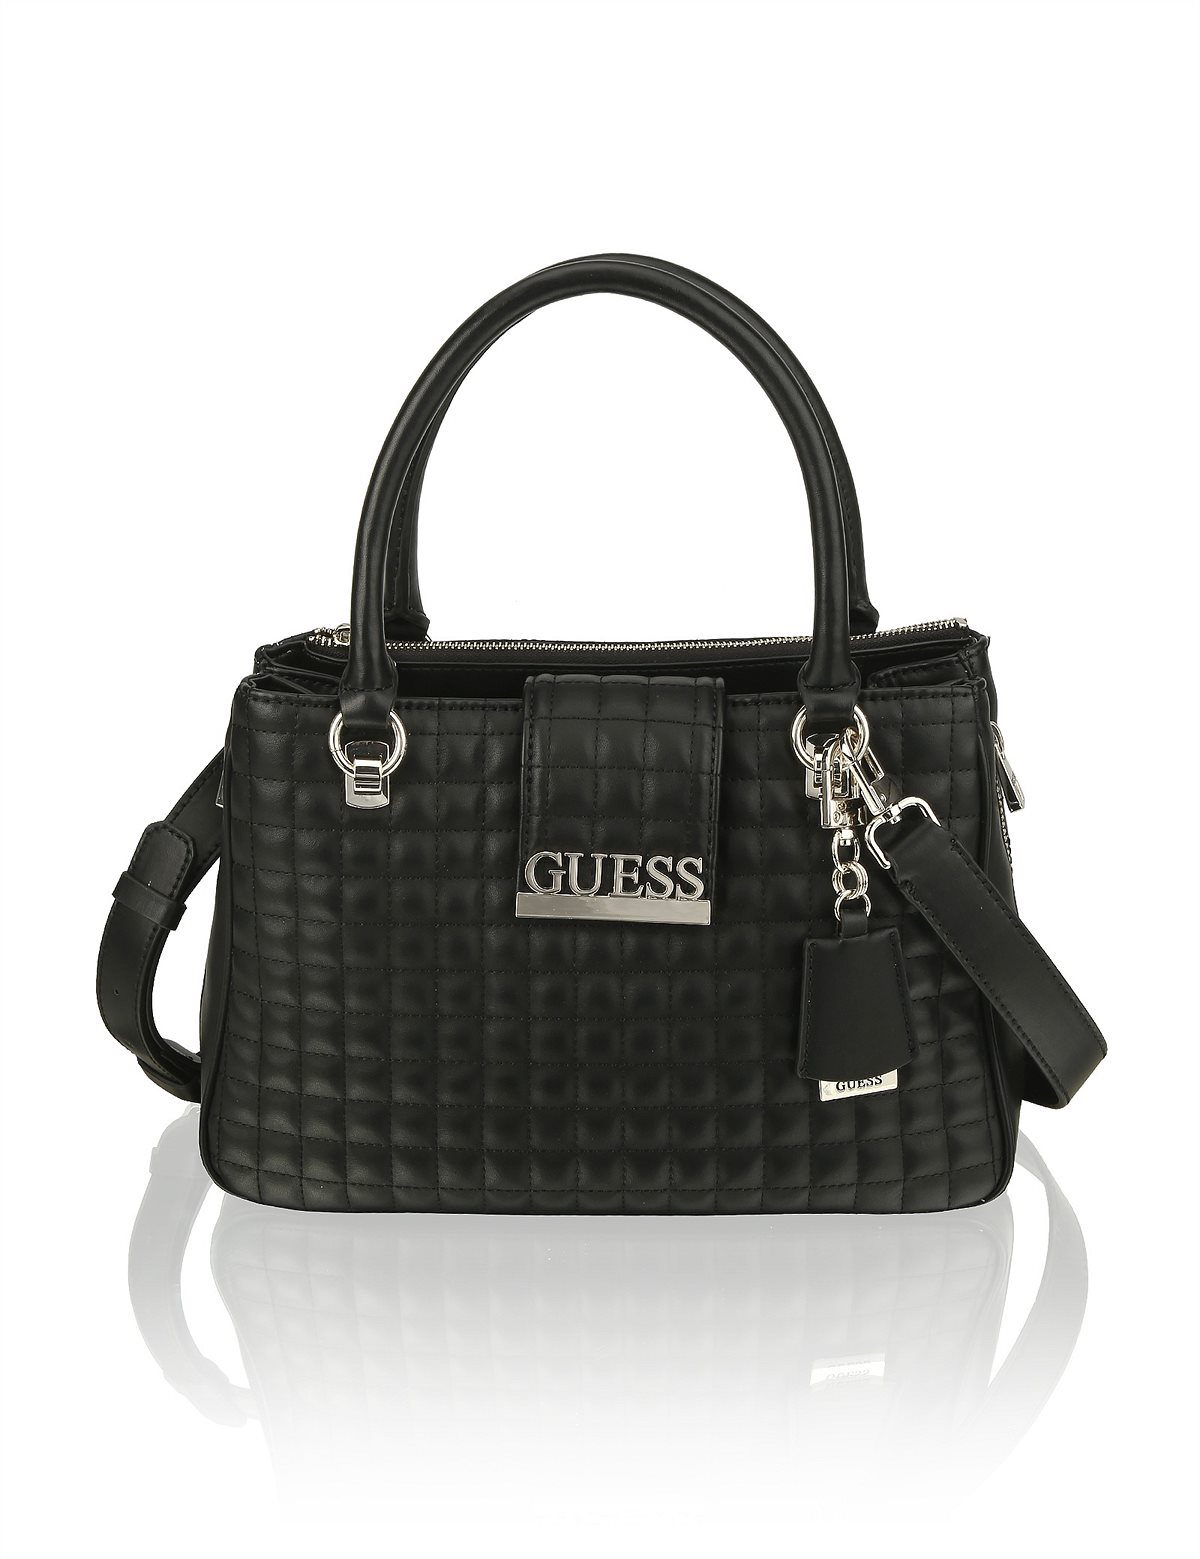 HUMANIC 20 Guess Quilted Bag mit Schnalle EUR 145 6131002160